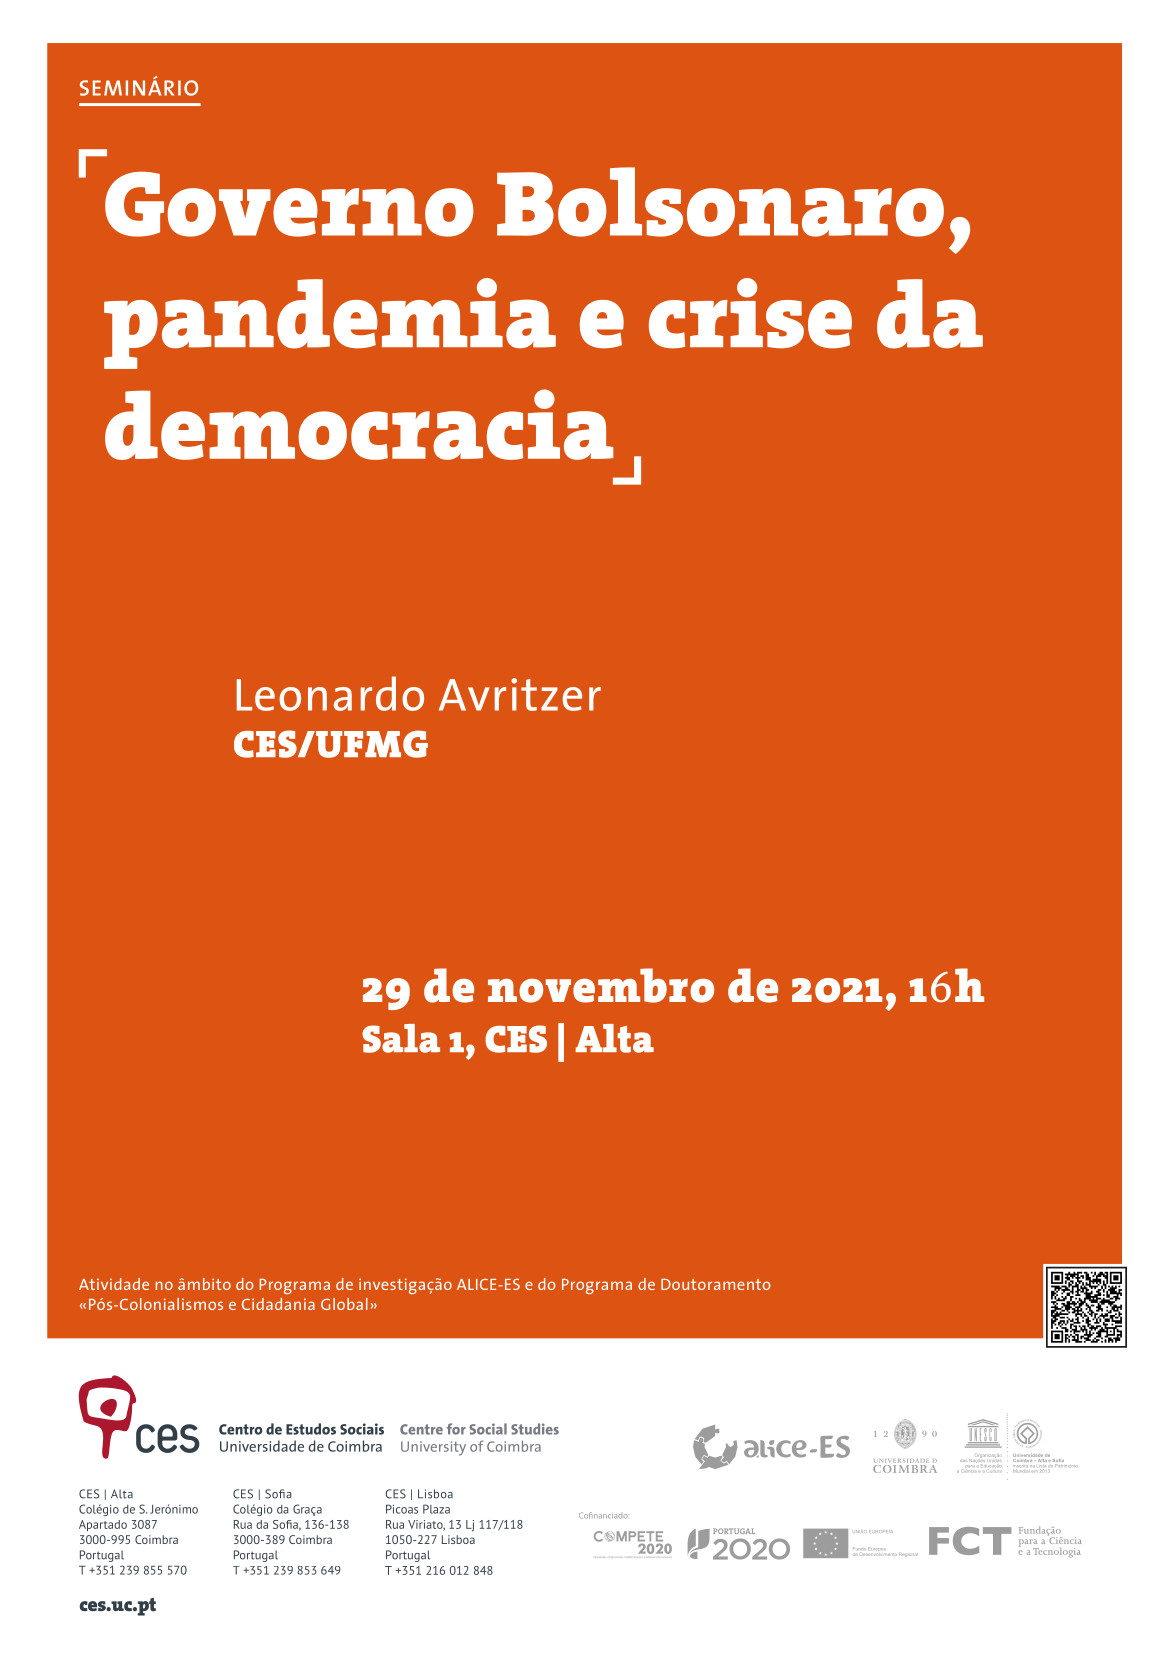 The Bolsonaro Government, the Pandemic and the Crisis of Democracy<span id="edit_36034"><script>$(function() { $('#edit_36034').load( "/myces/user/editobj.php?tipo=evento&id=36034" ); });</script></span>